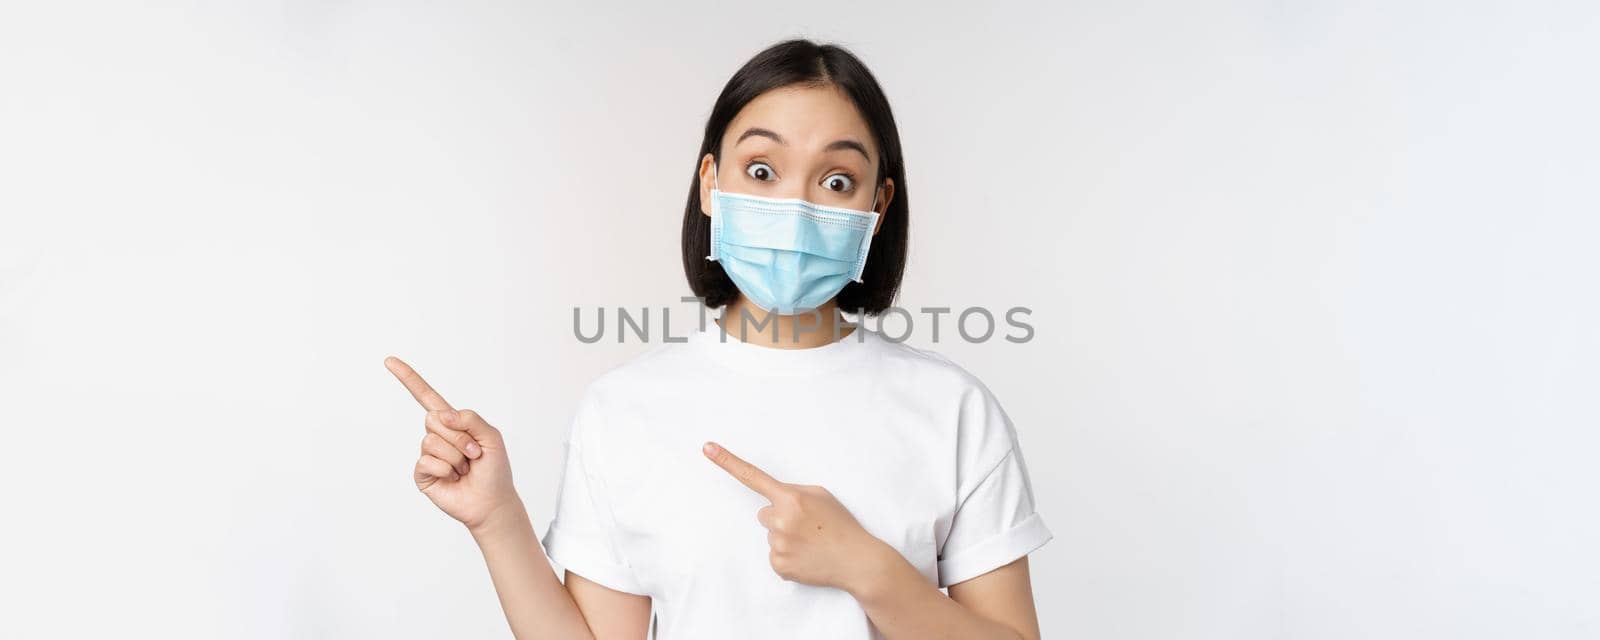 Surprised asian girl in medical mask, pointing fingers left, showing promo offer, raising eyebrows, amazed reaction, standing against white background.